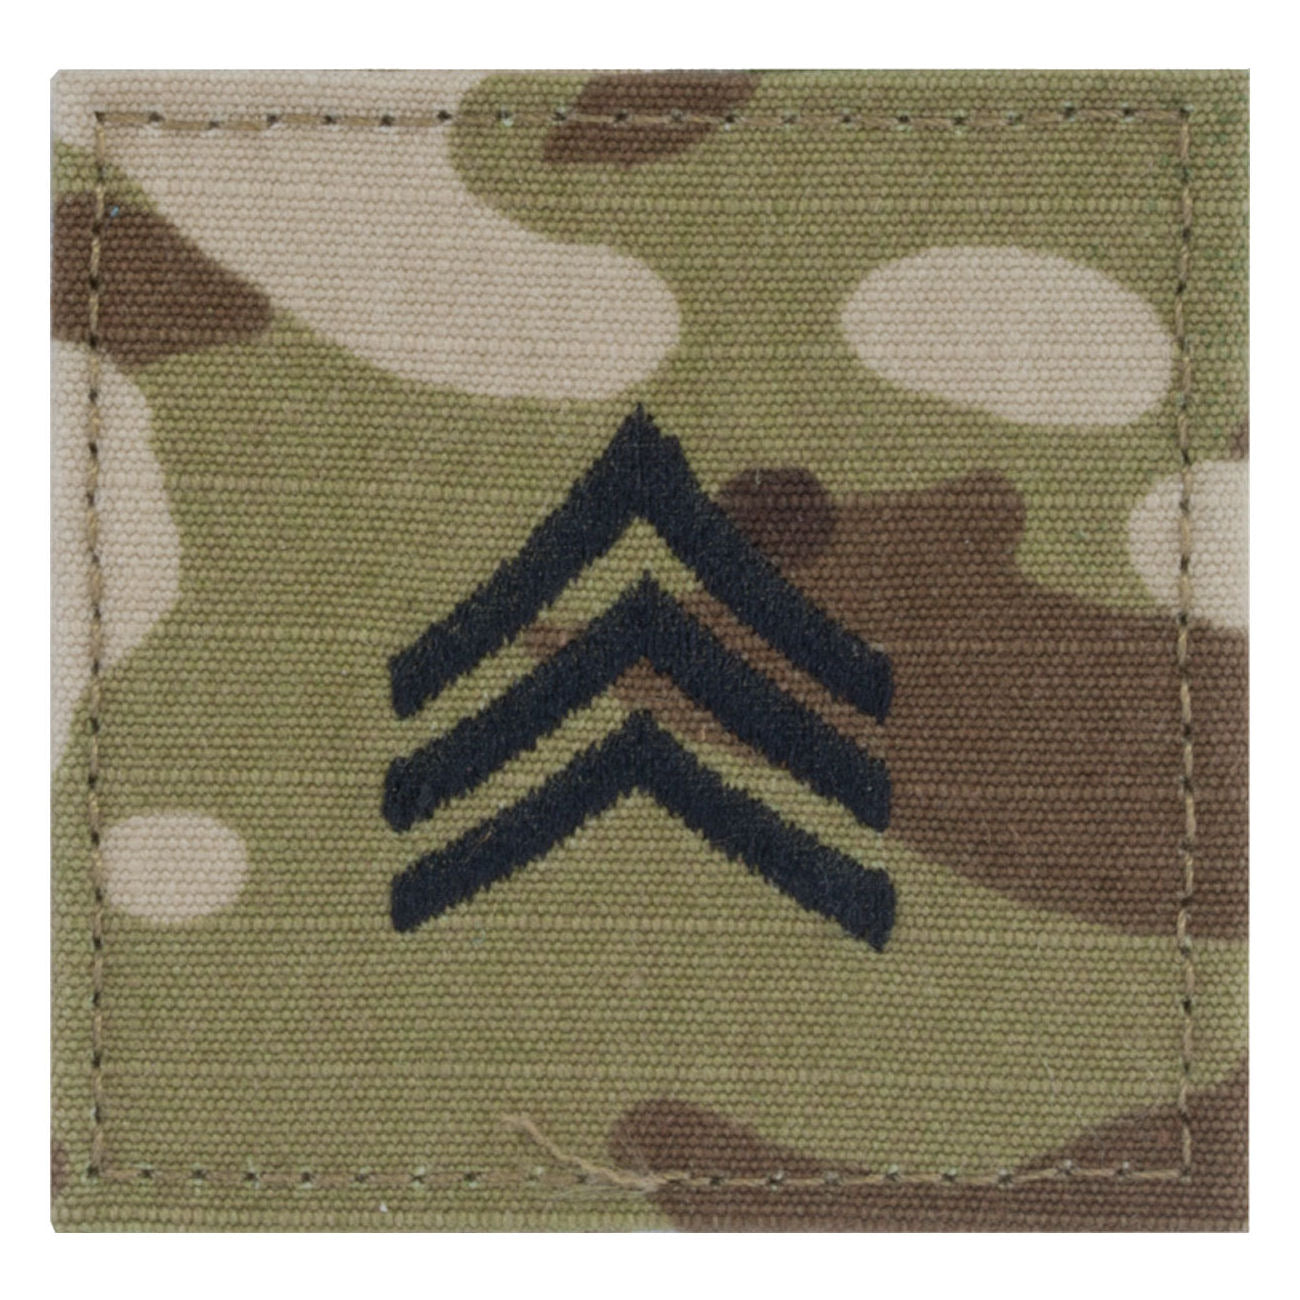 Military Uniform Supply OCP Name Tape Rank Insignia Package with Flag Patch  - US Army Scorpion Camo